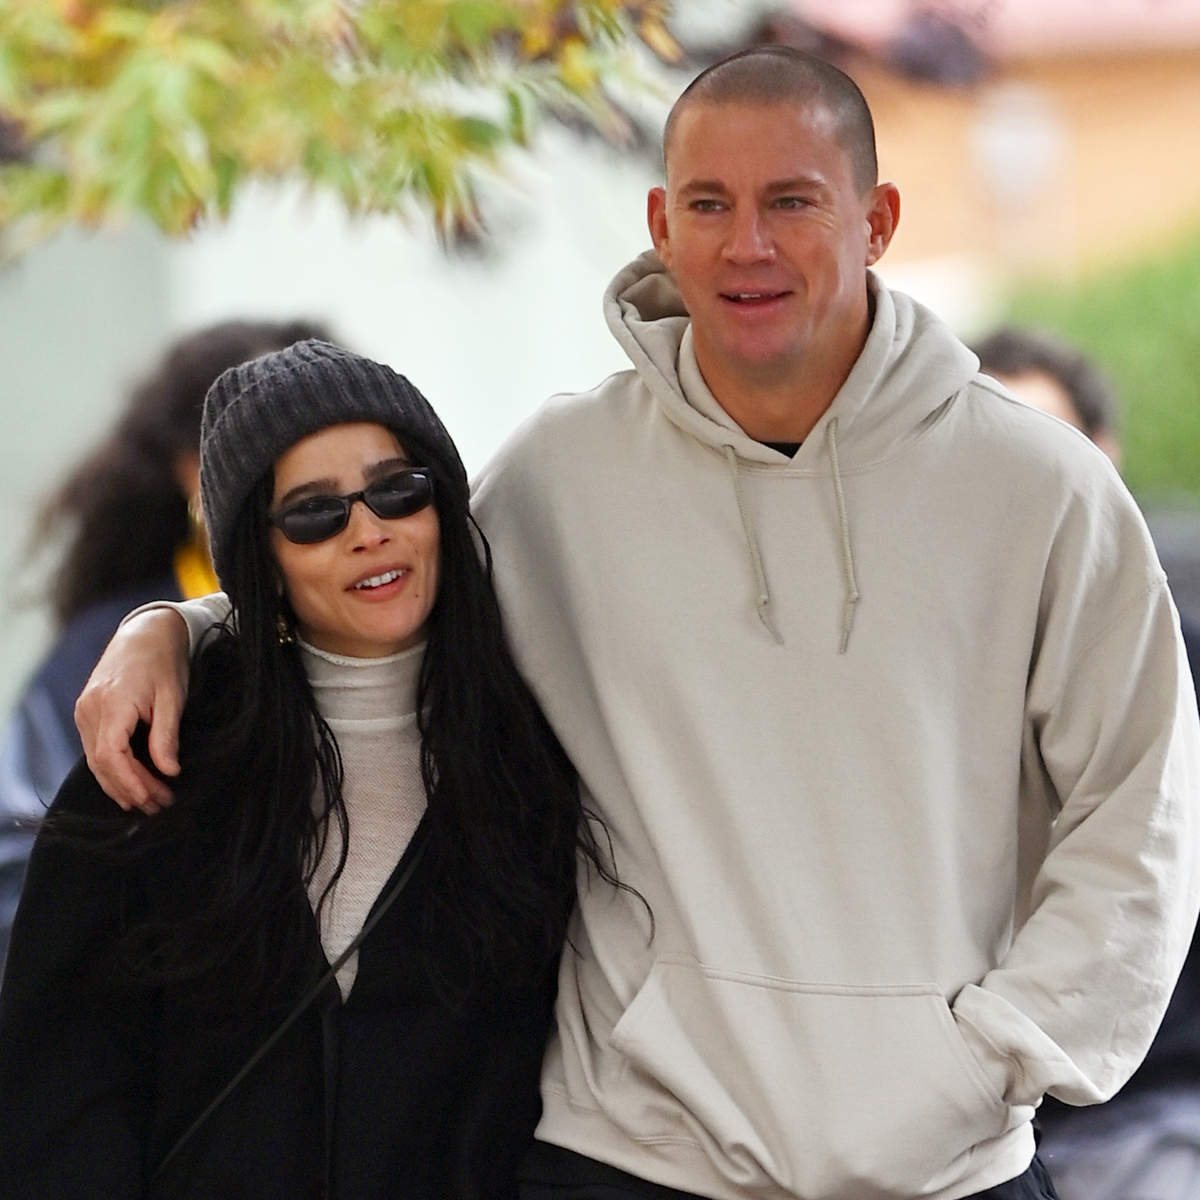 Zoë Kravitz and Channing Tatum Are Engaged After 2 Years of Dating - E! NEWS